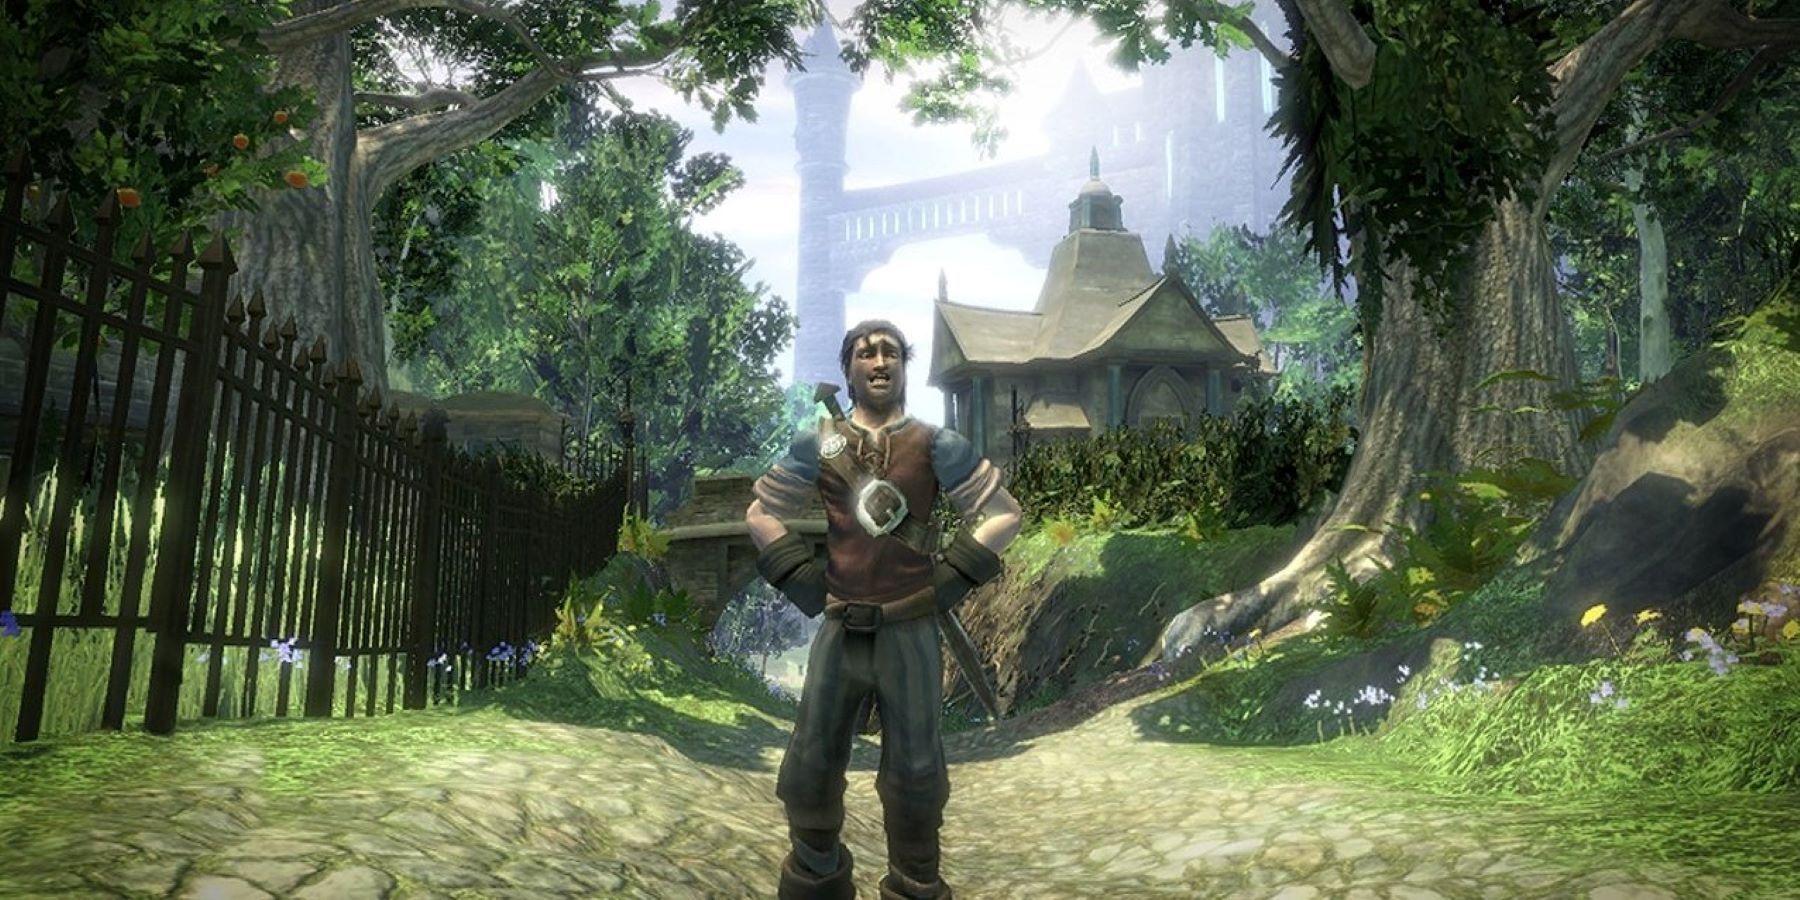 A Fable 2 protagonist standing on a paved woodland road with a city in the background